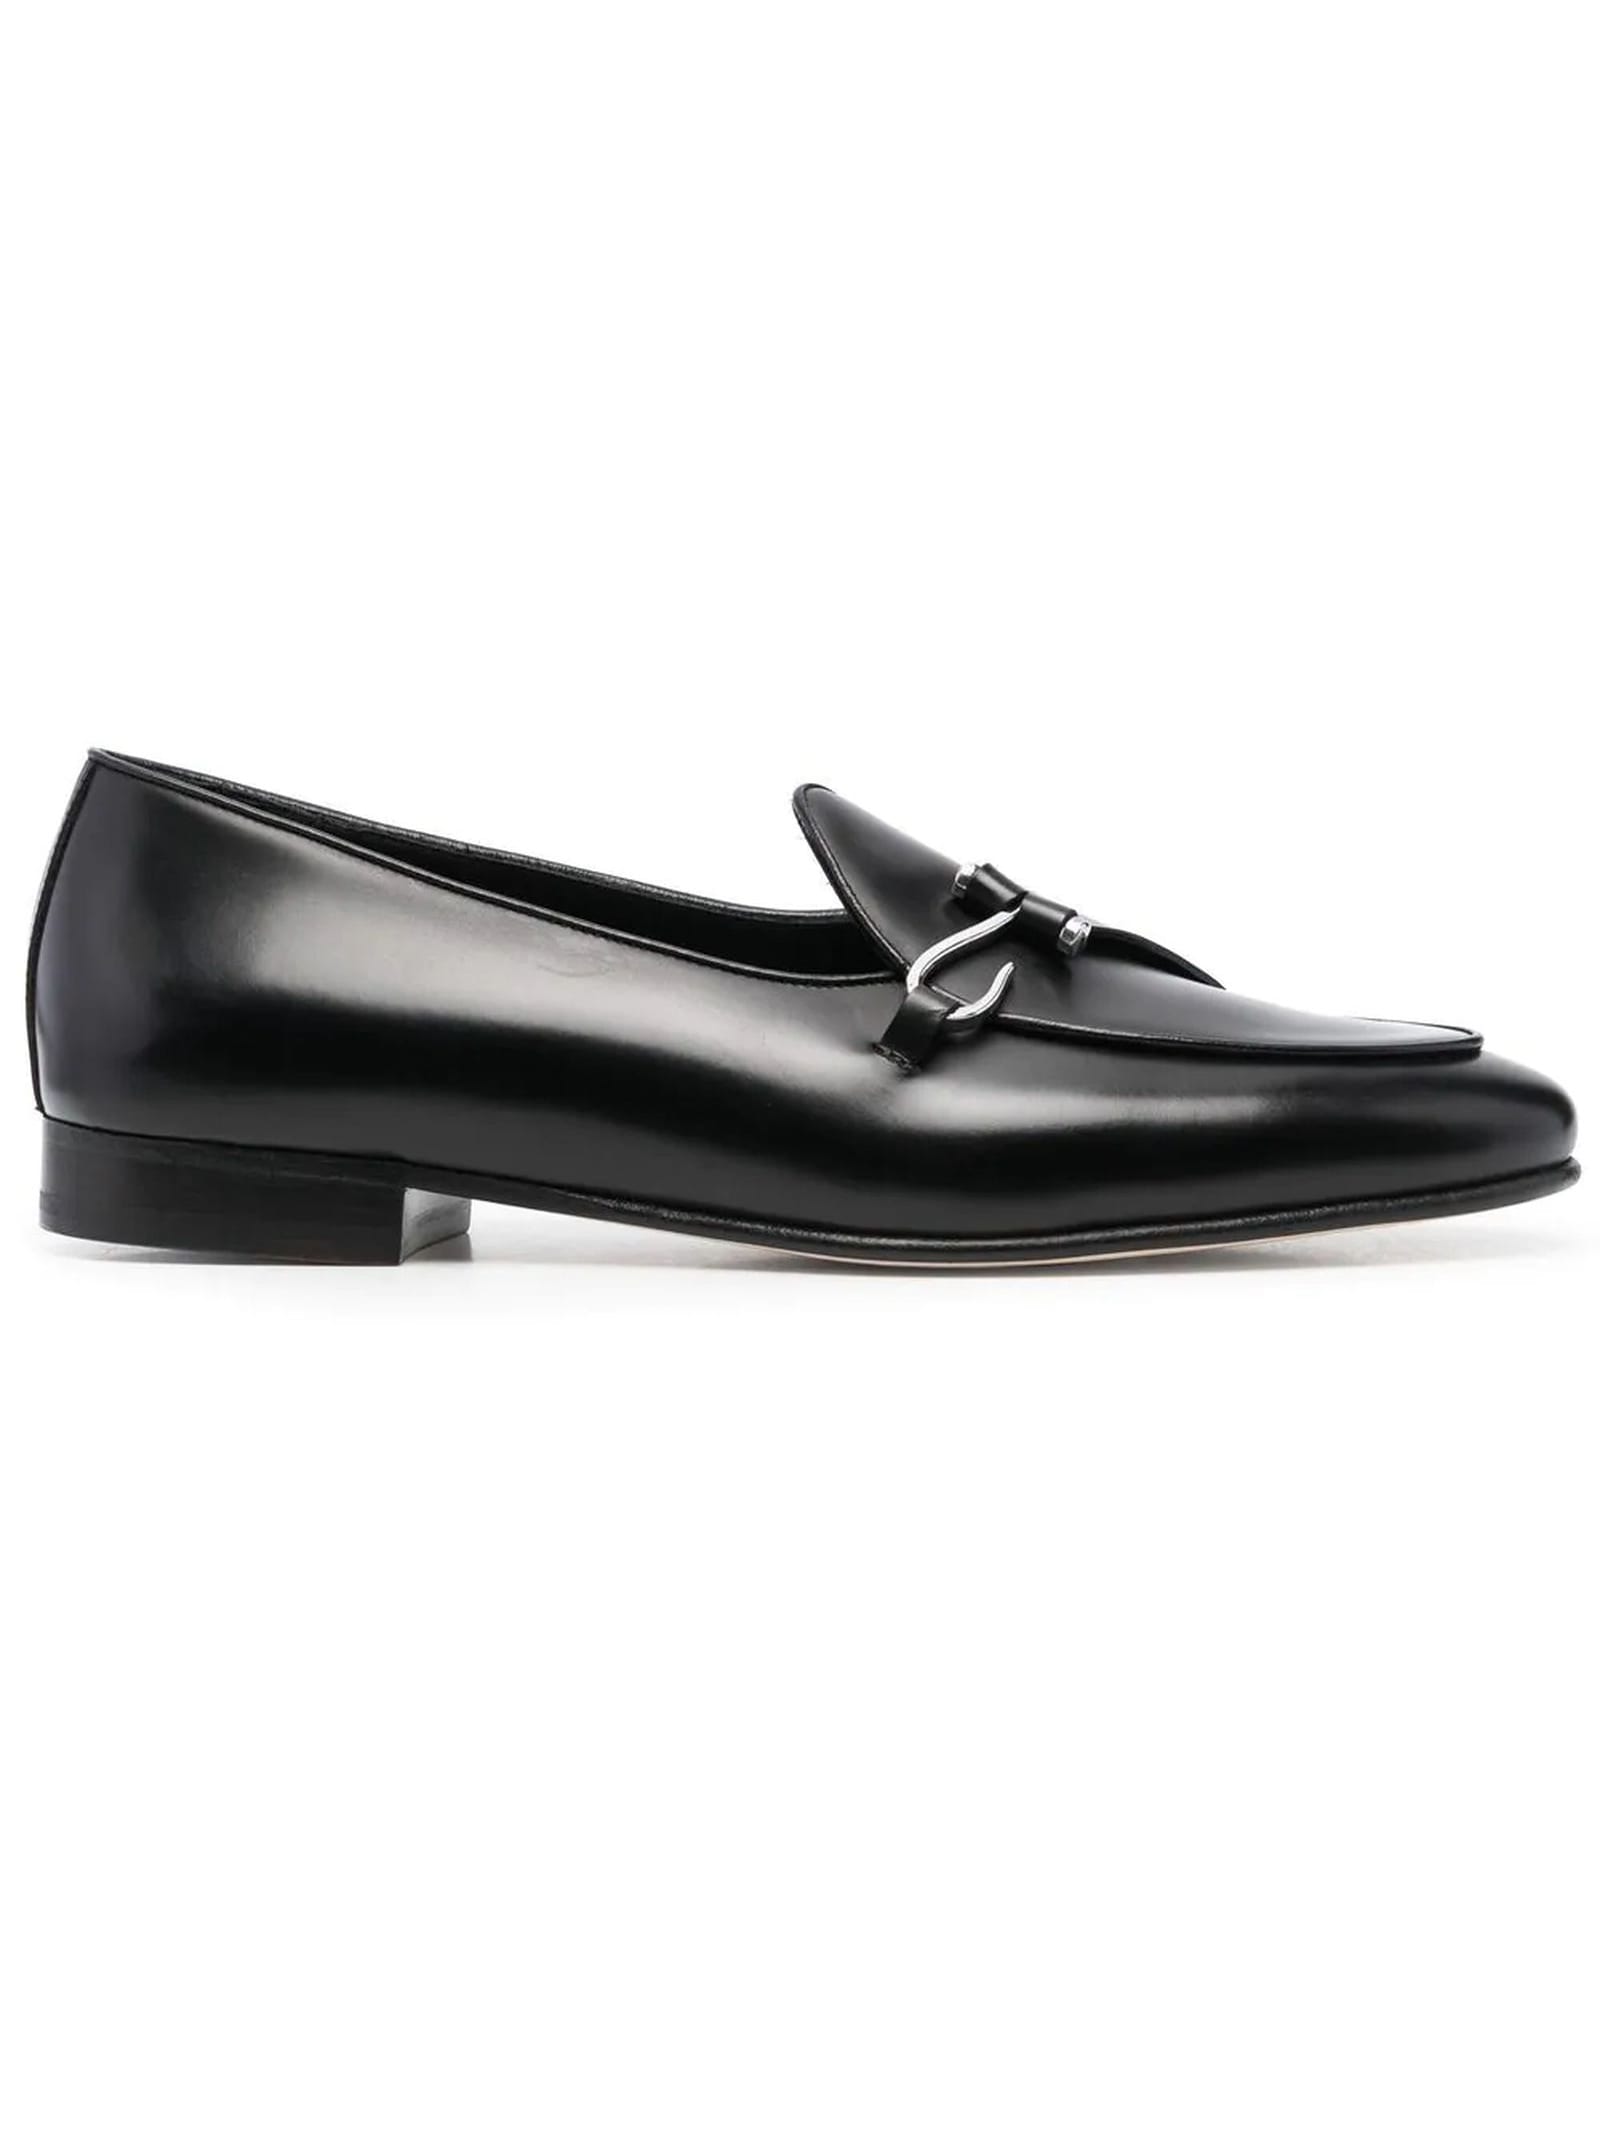 EDHEN MILANO BLACK LEATHER COMPORTA LOAFERS